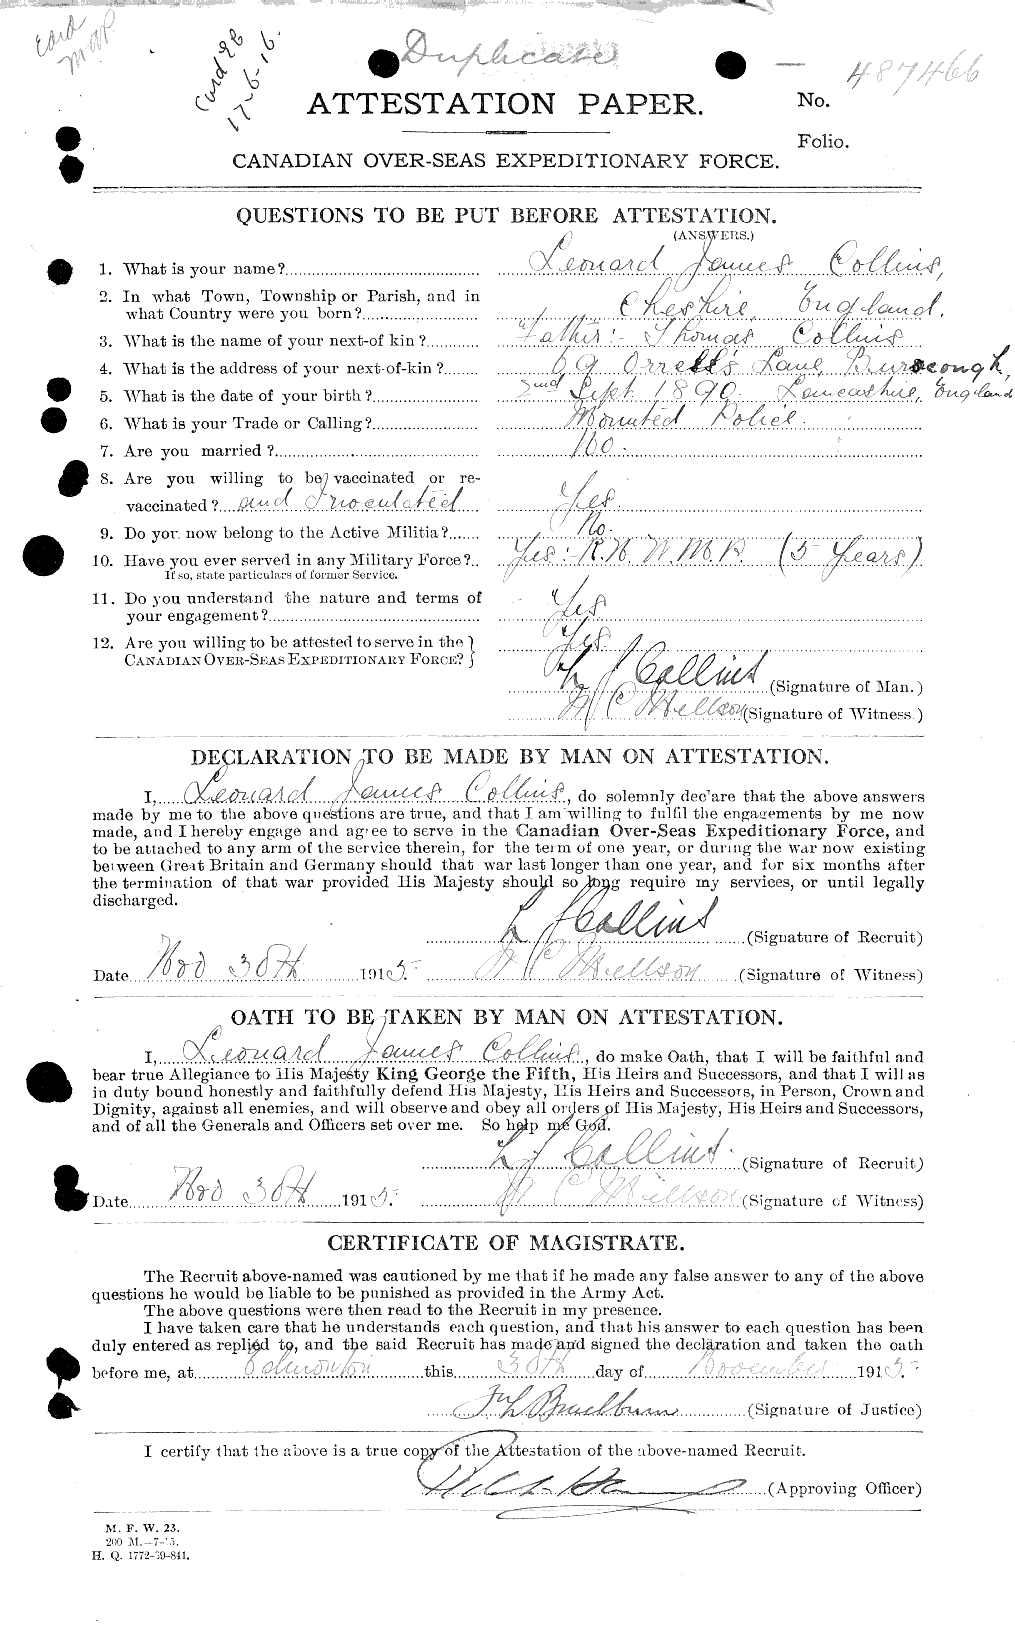 Personnel Records of the First World War - CEF 034442a